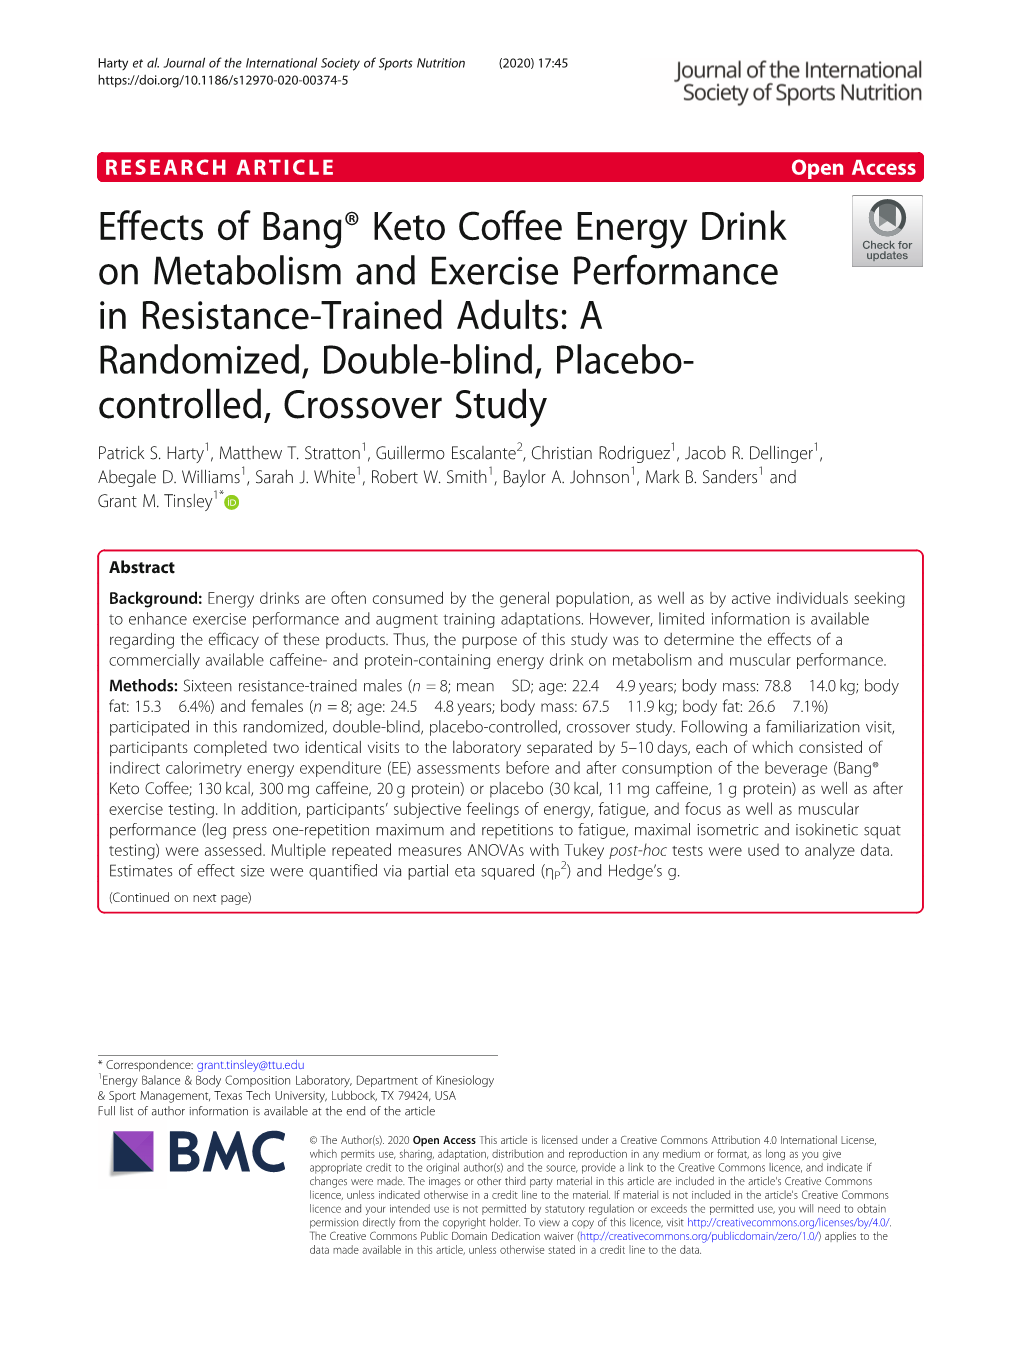 Effects of Bang® Keto Coffee Energy Drink on Metabolism and Exercise